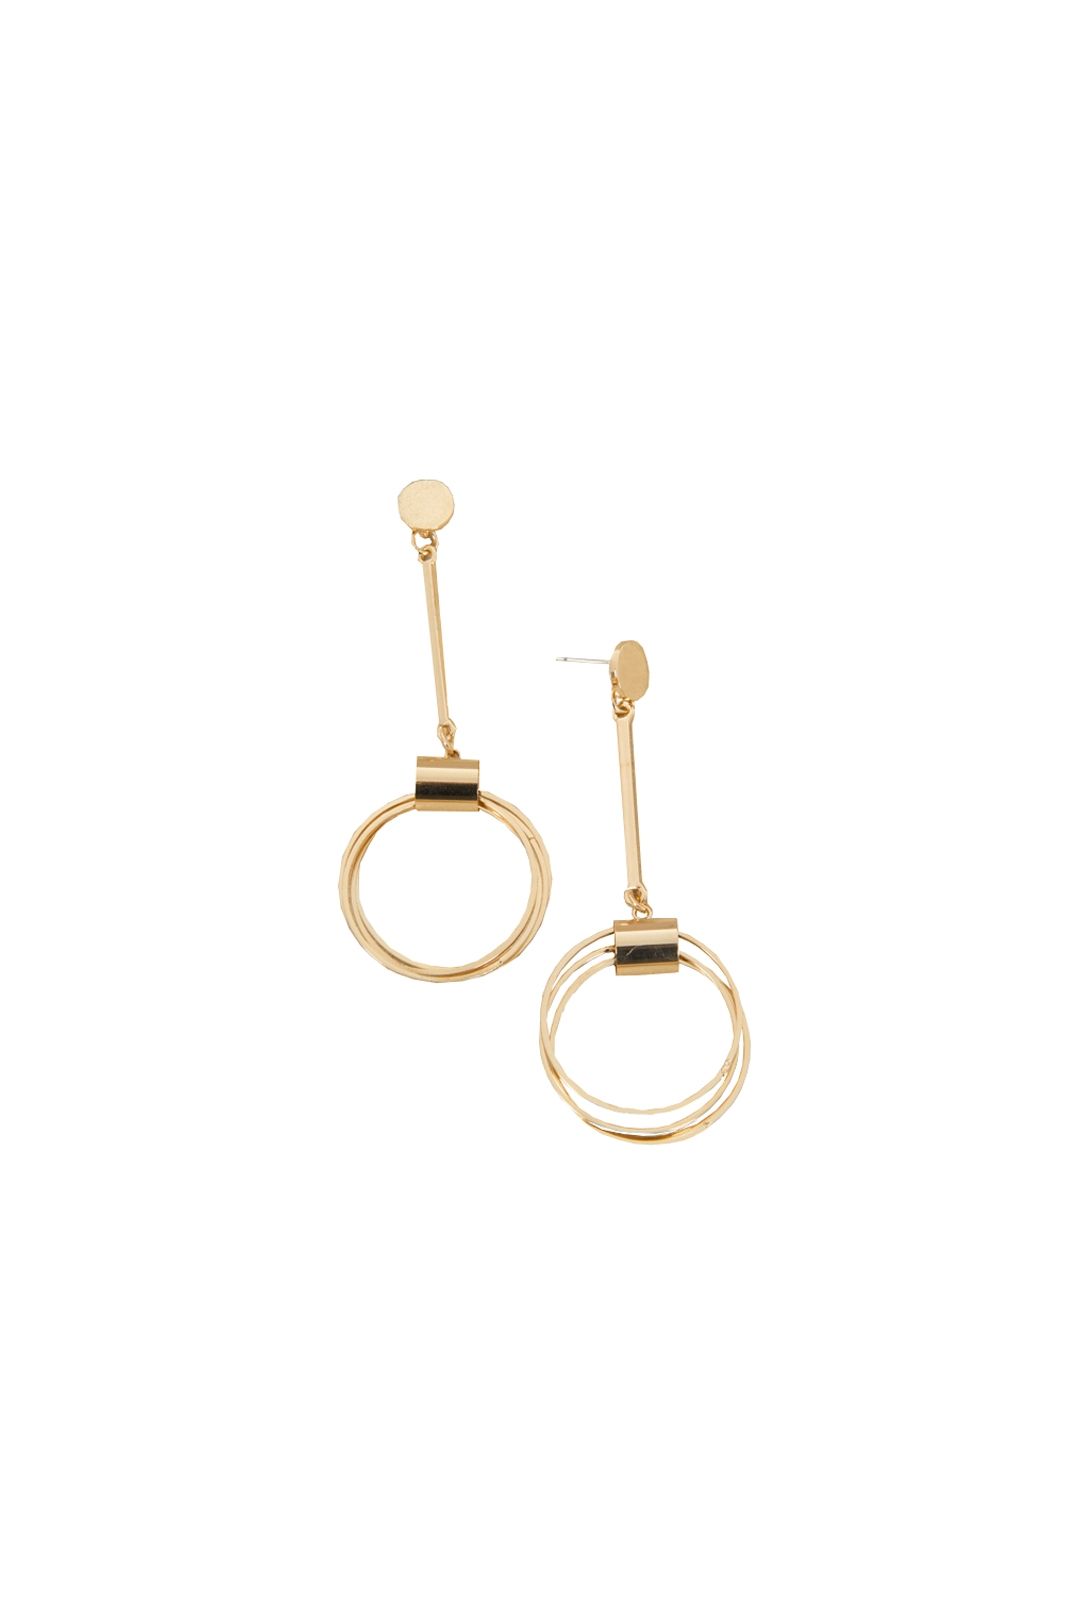 Adorne - 9cm Button and Rings Drop Earring - Gold - Front